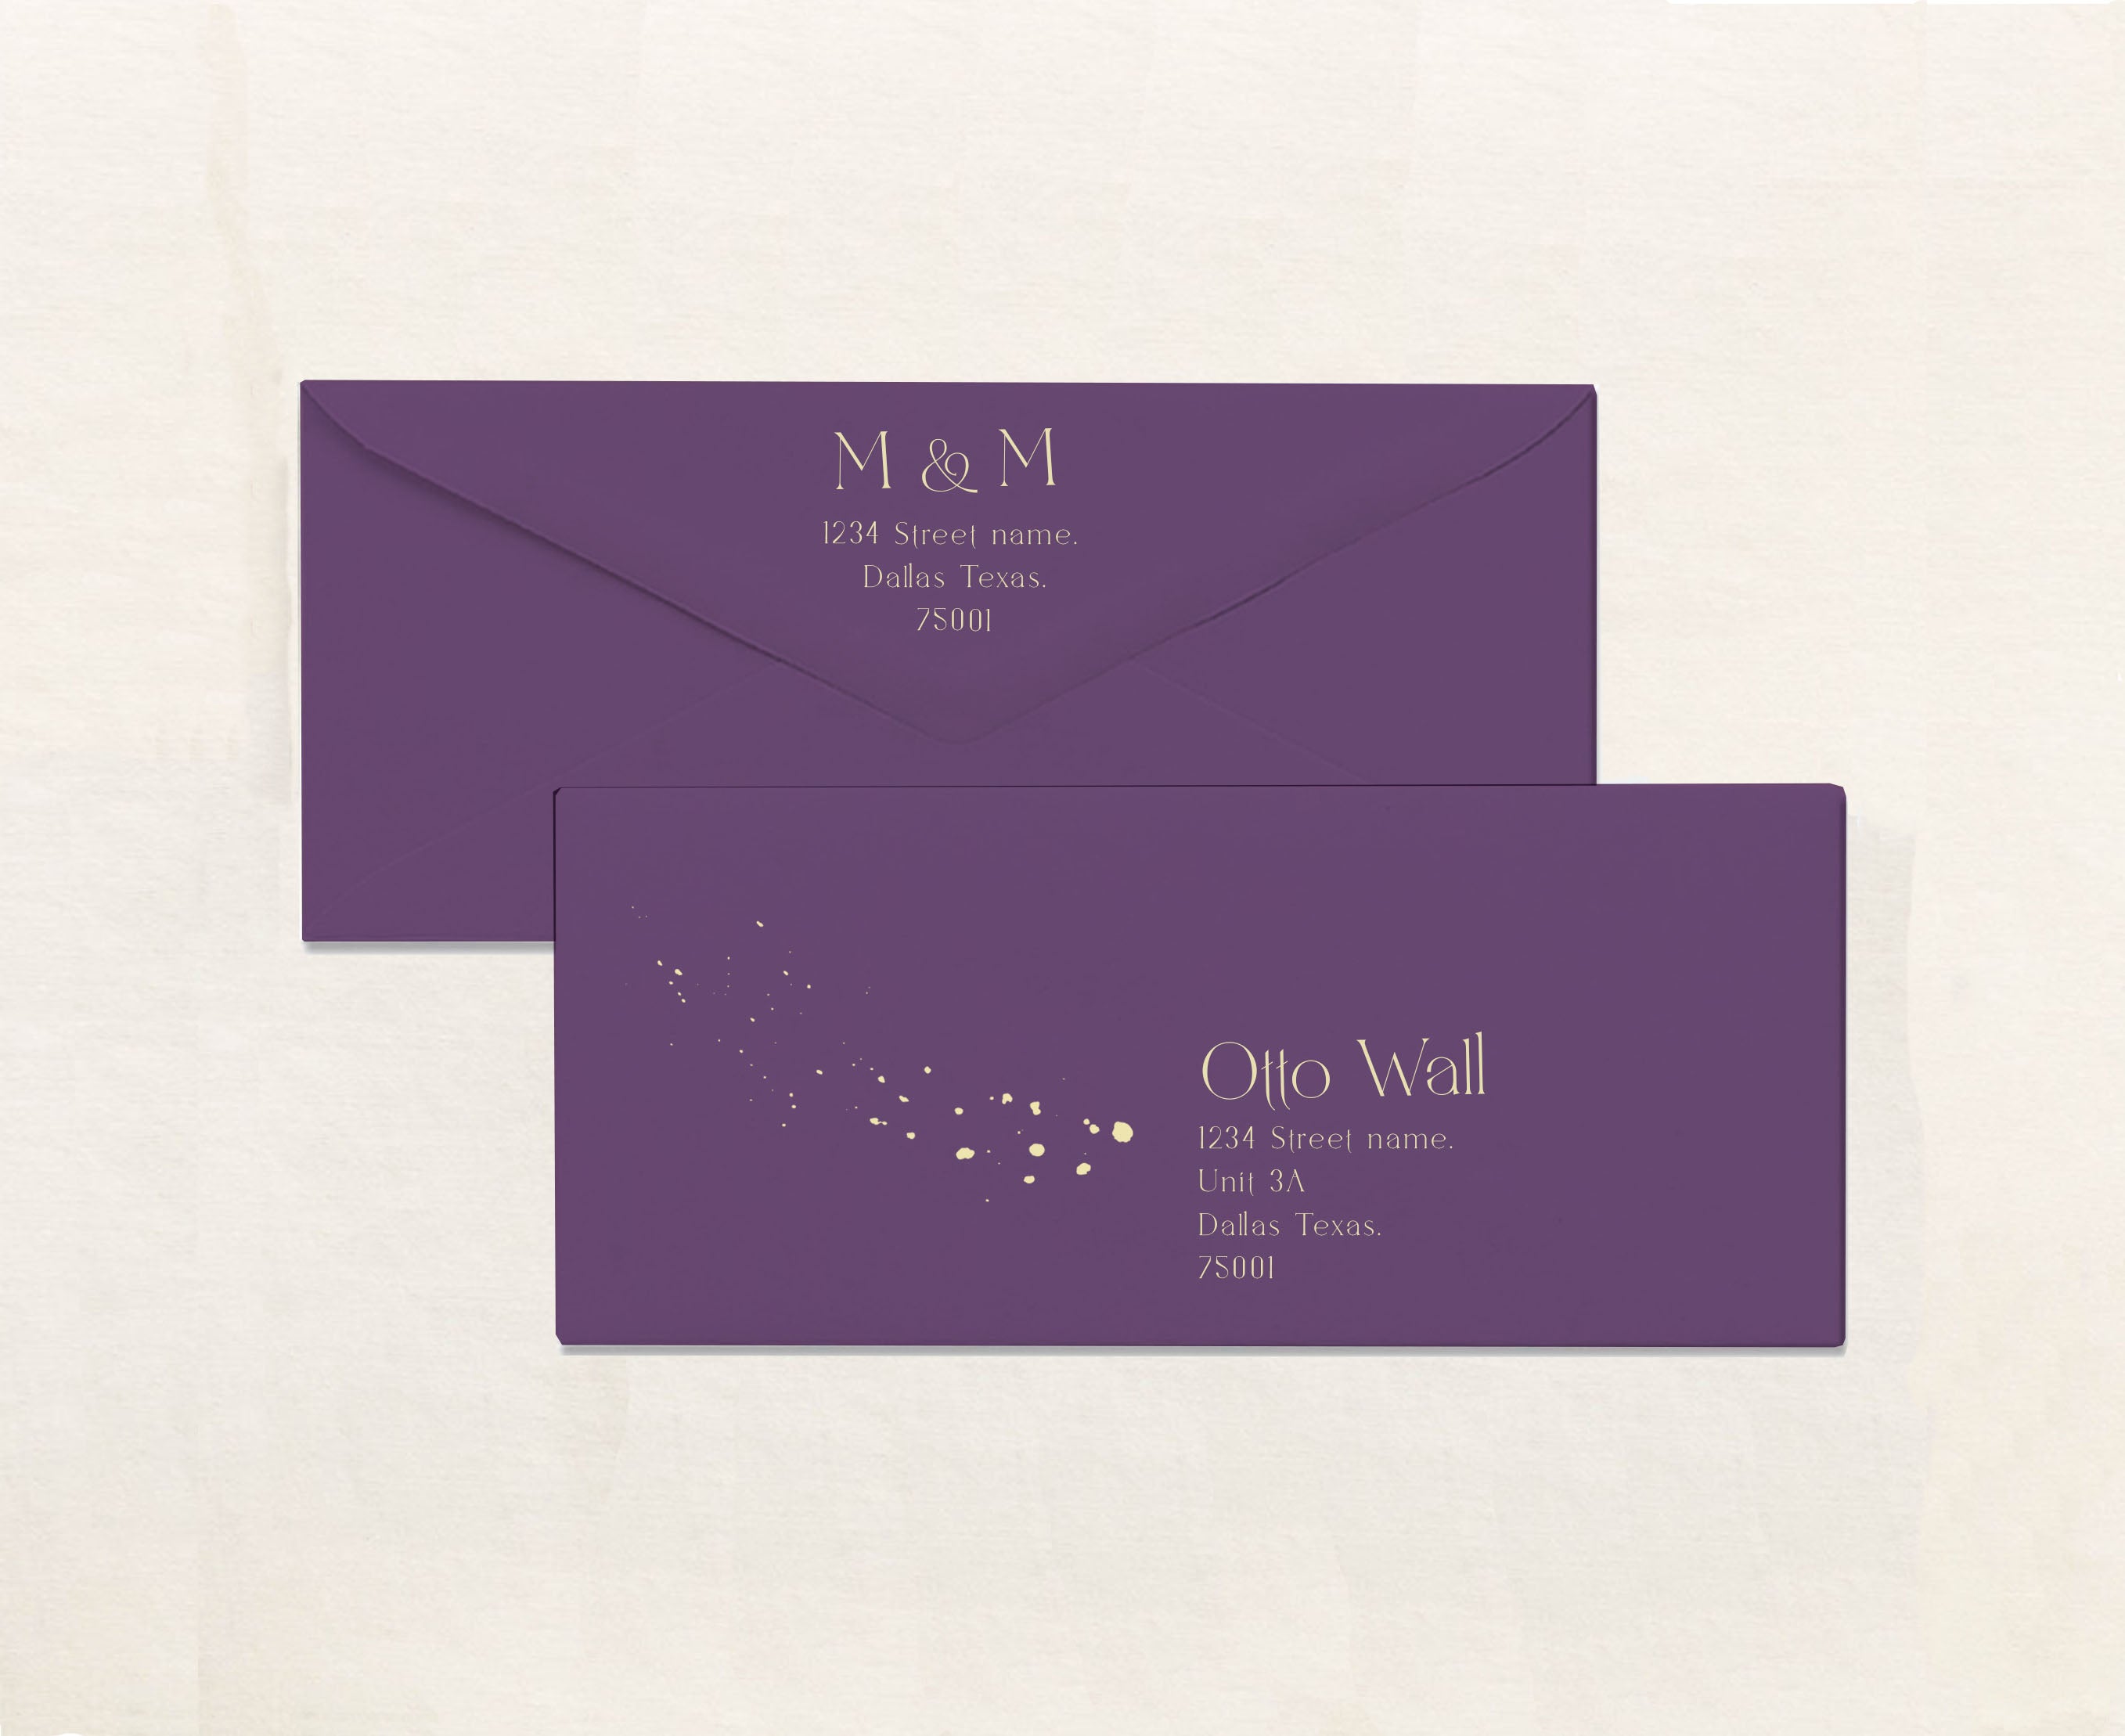 Galaxy Engagement Party Invite